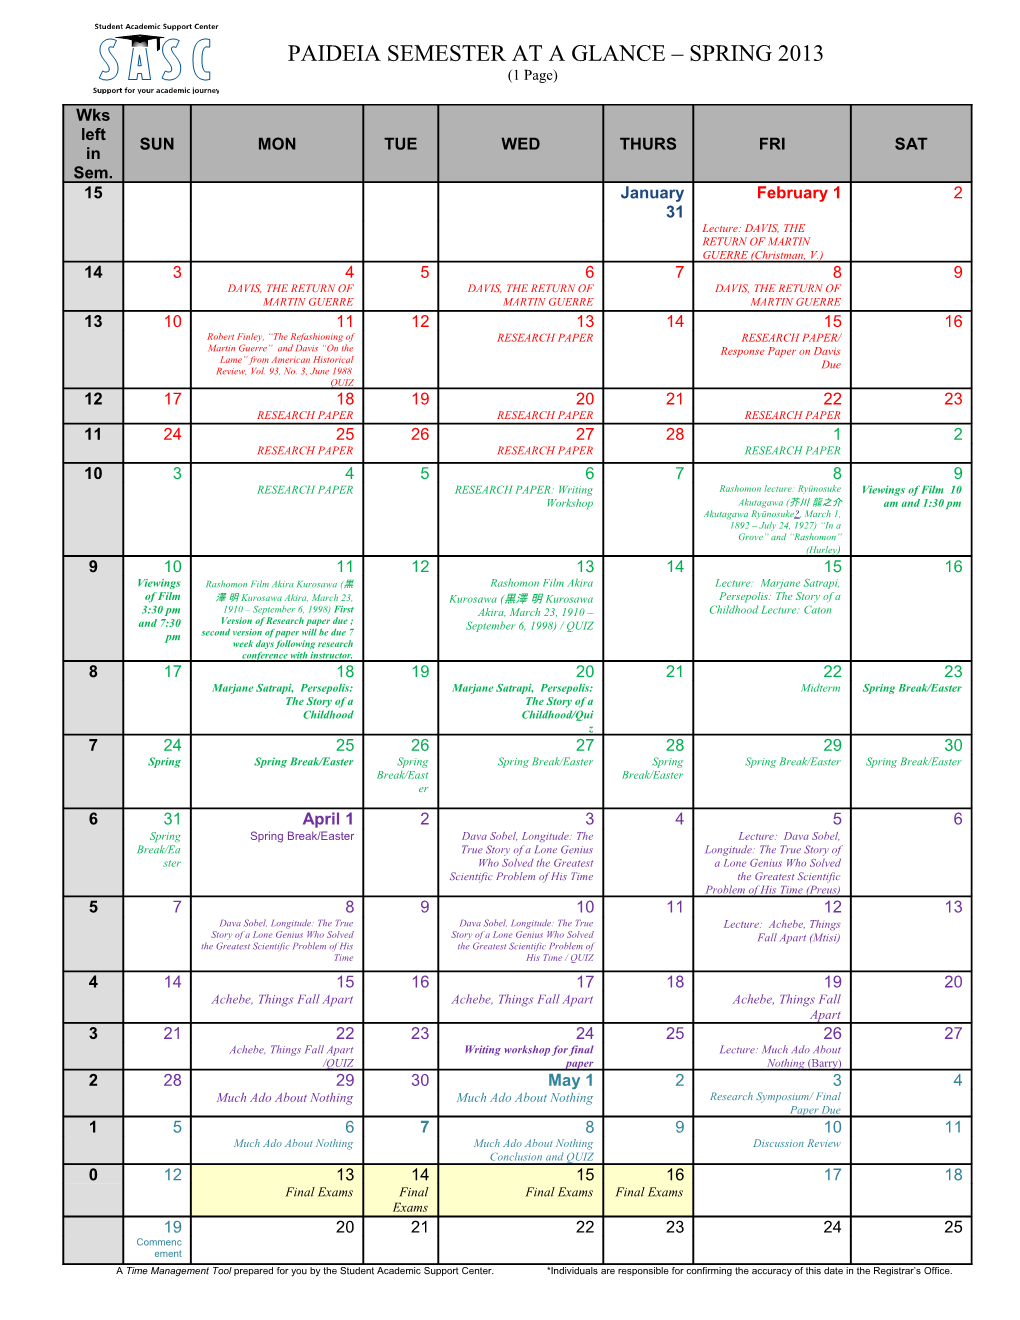 Paideia Semester at a Glance Spring 2013